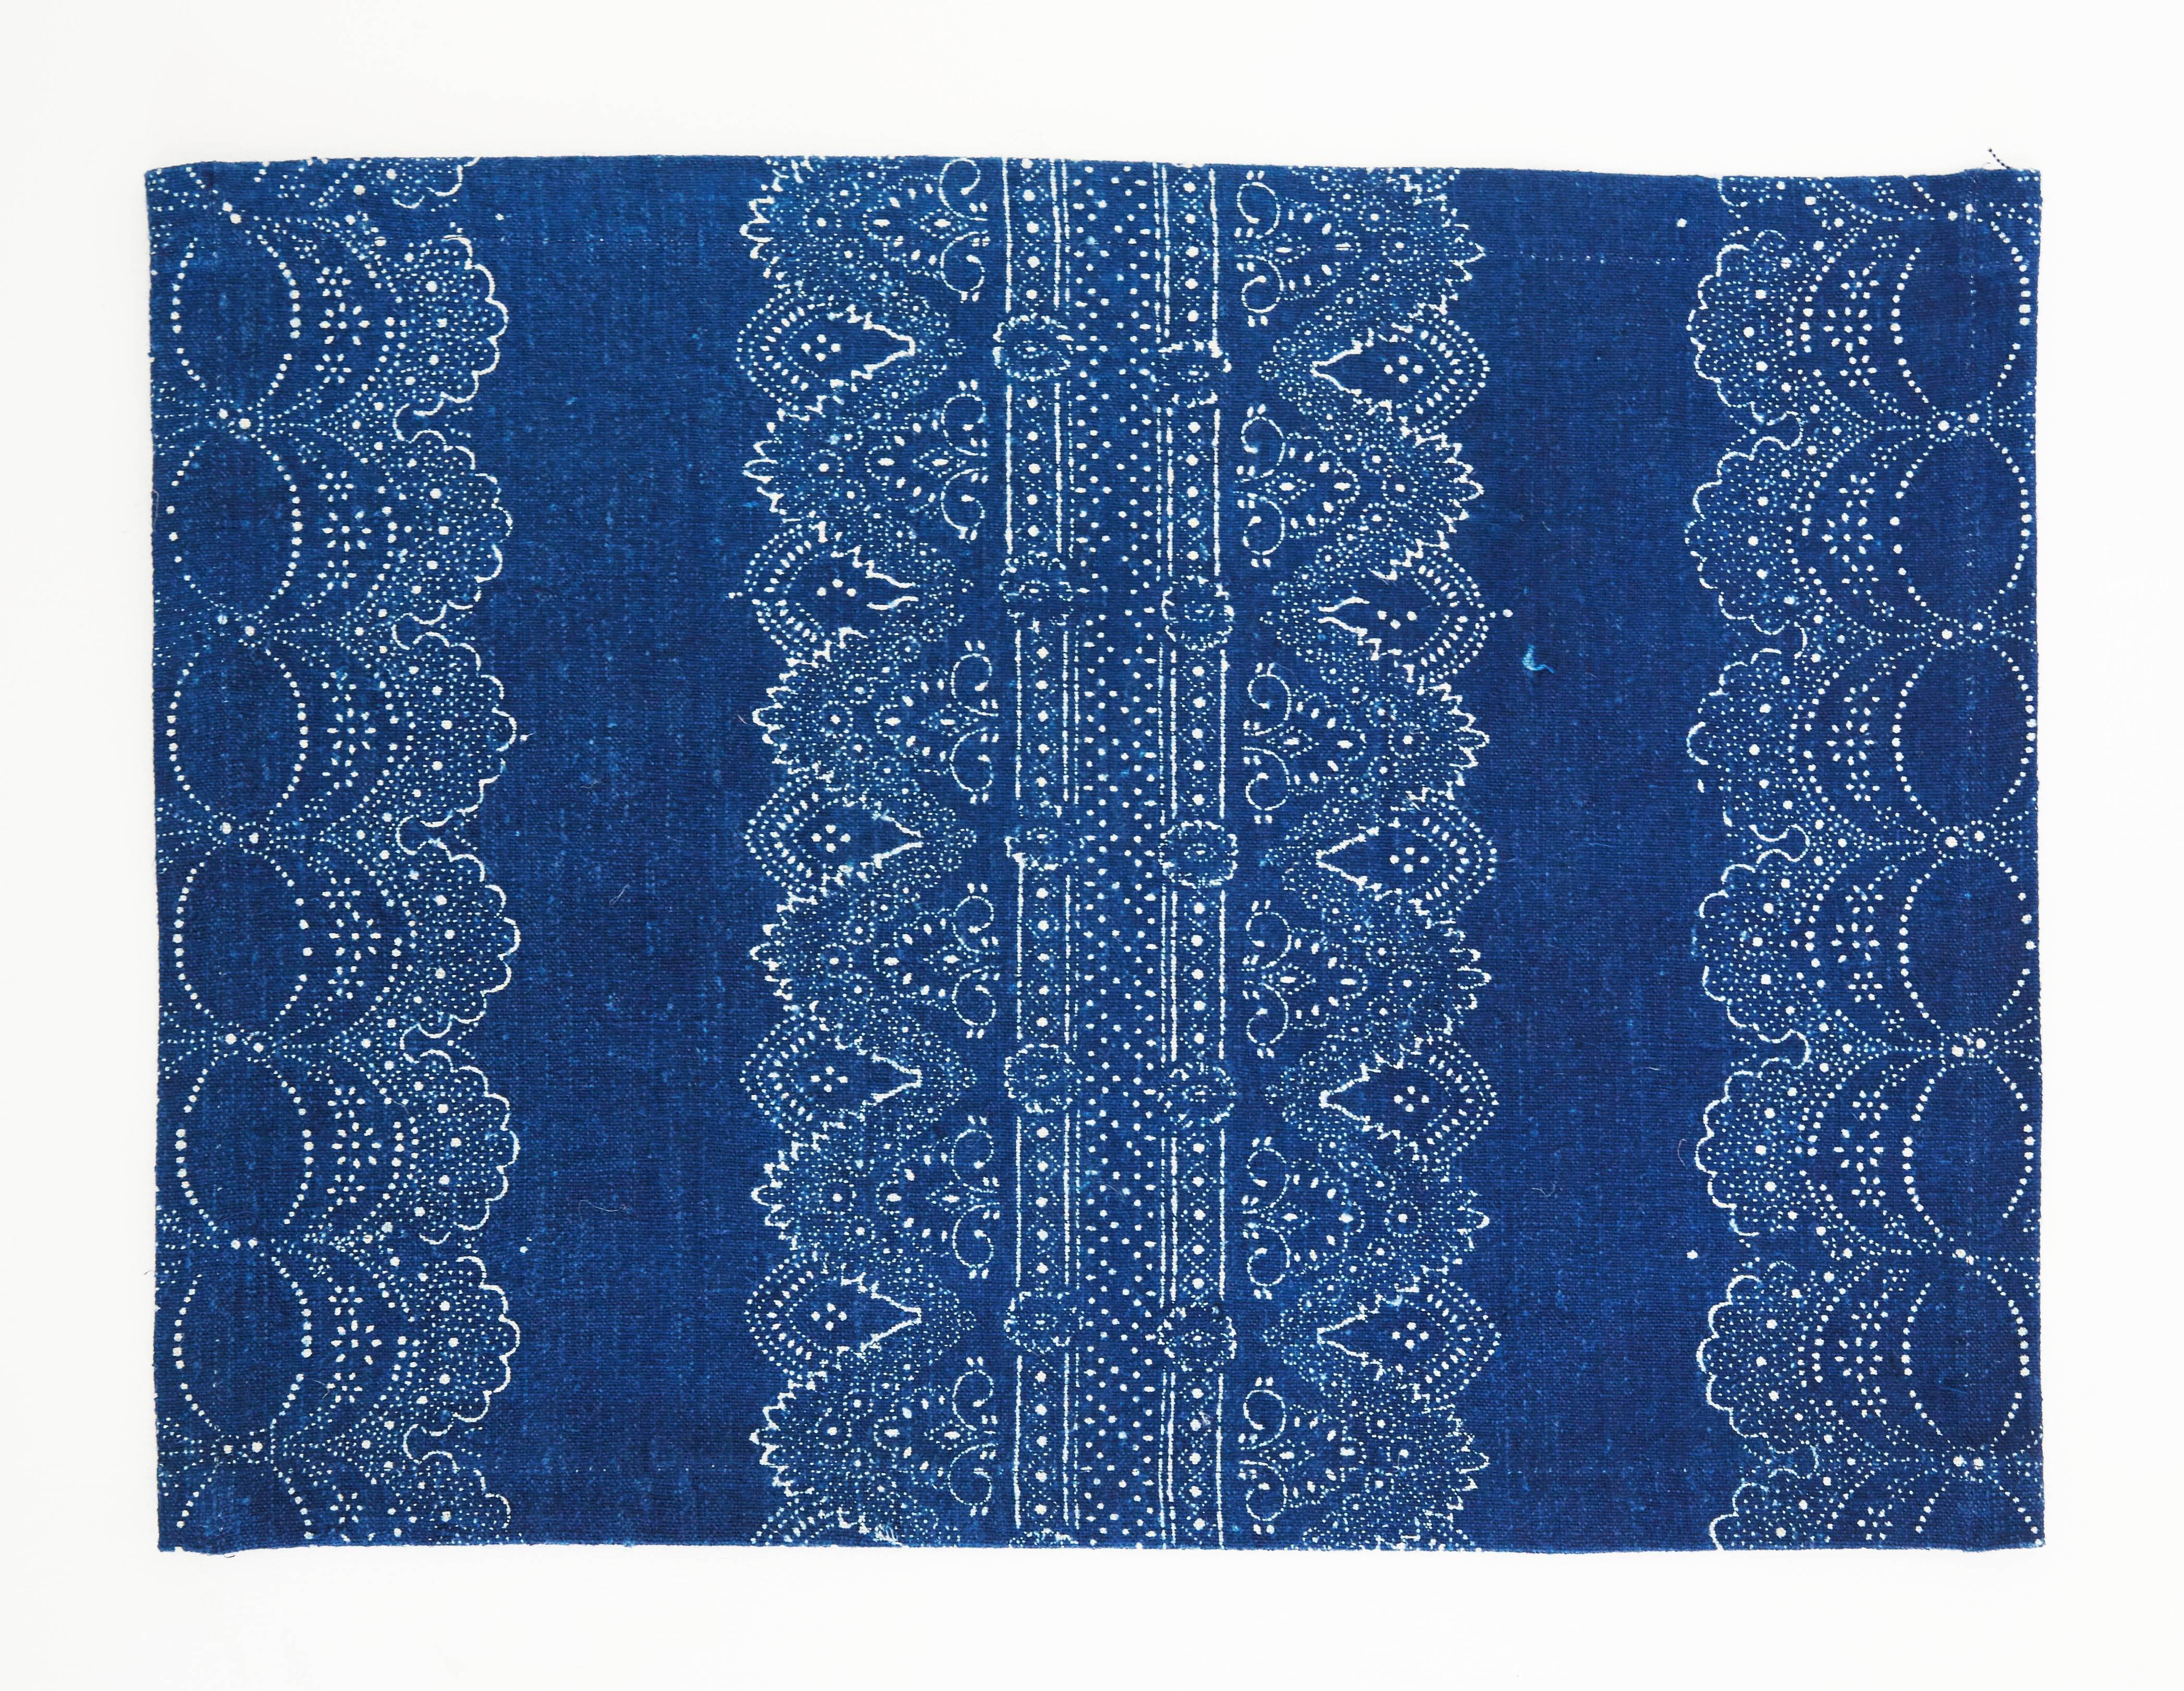 These placemats are hand dyed and hand printed using vintage linens and 250 year old printing blocks. They were indigo dyed by a master indigo dyer in Hungary following the original designs. These vintage placemats are reminiscent of beautiful